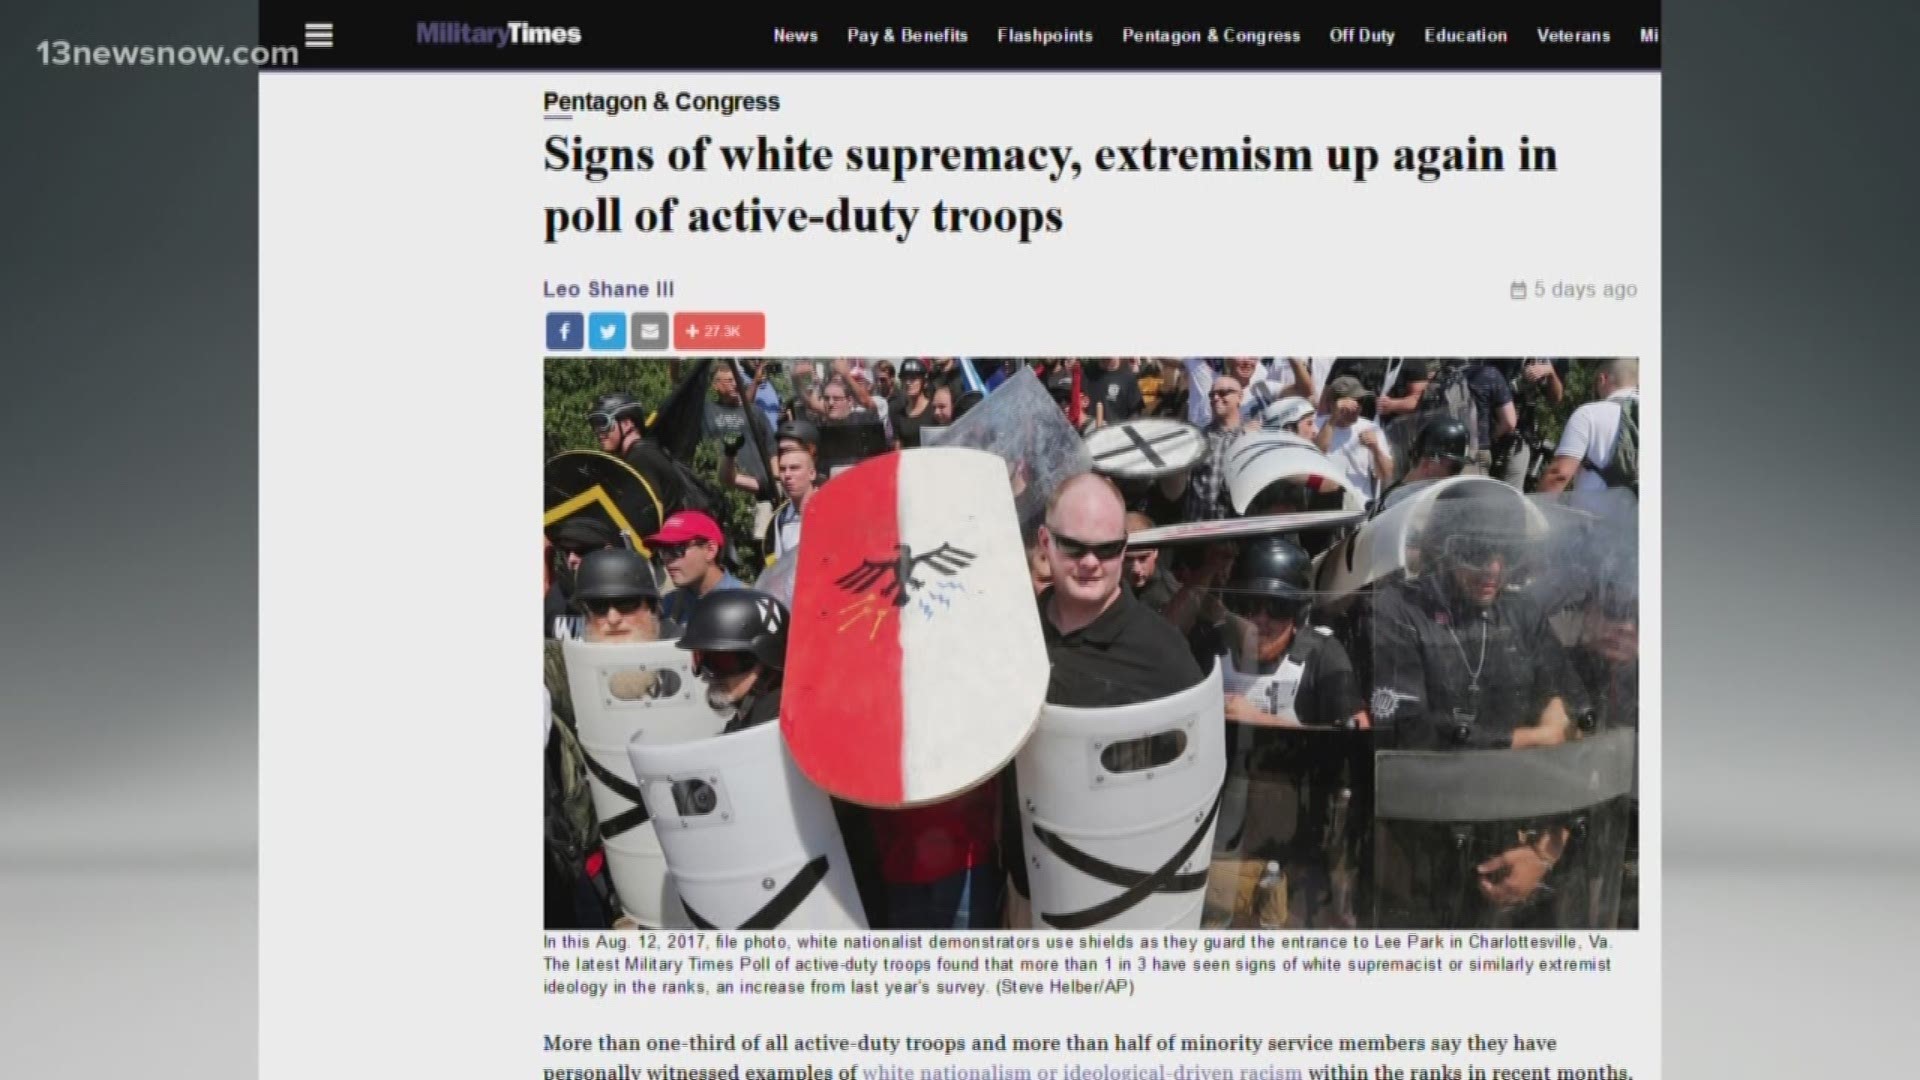 36 percent of active troops in Military Times poll say they've evidence of white supremacy ideologies.